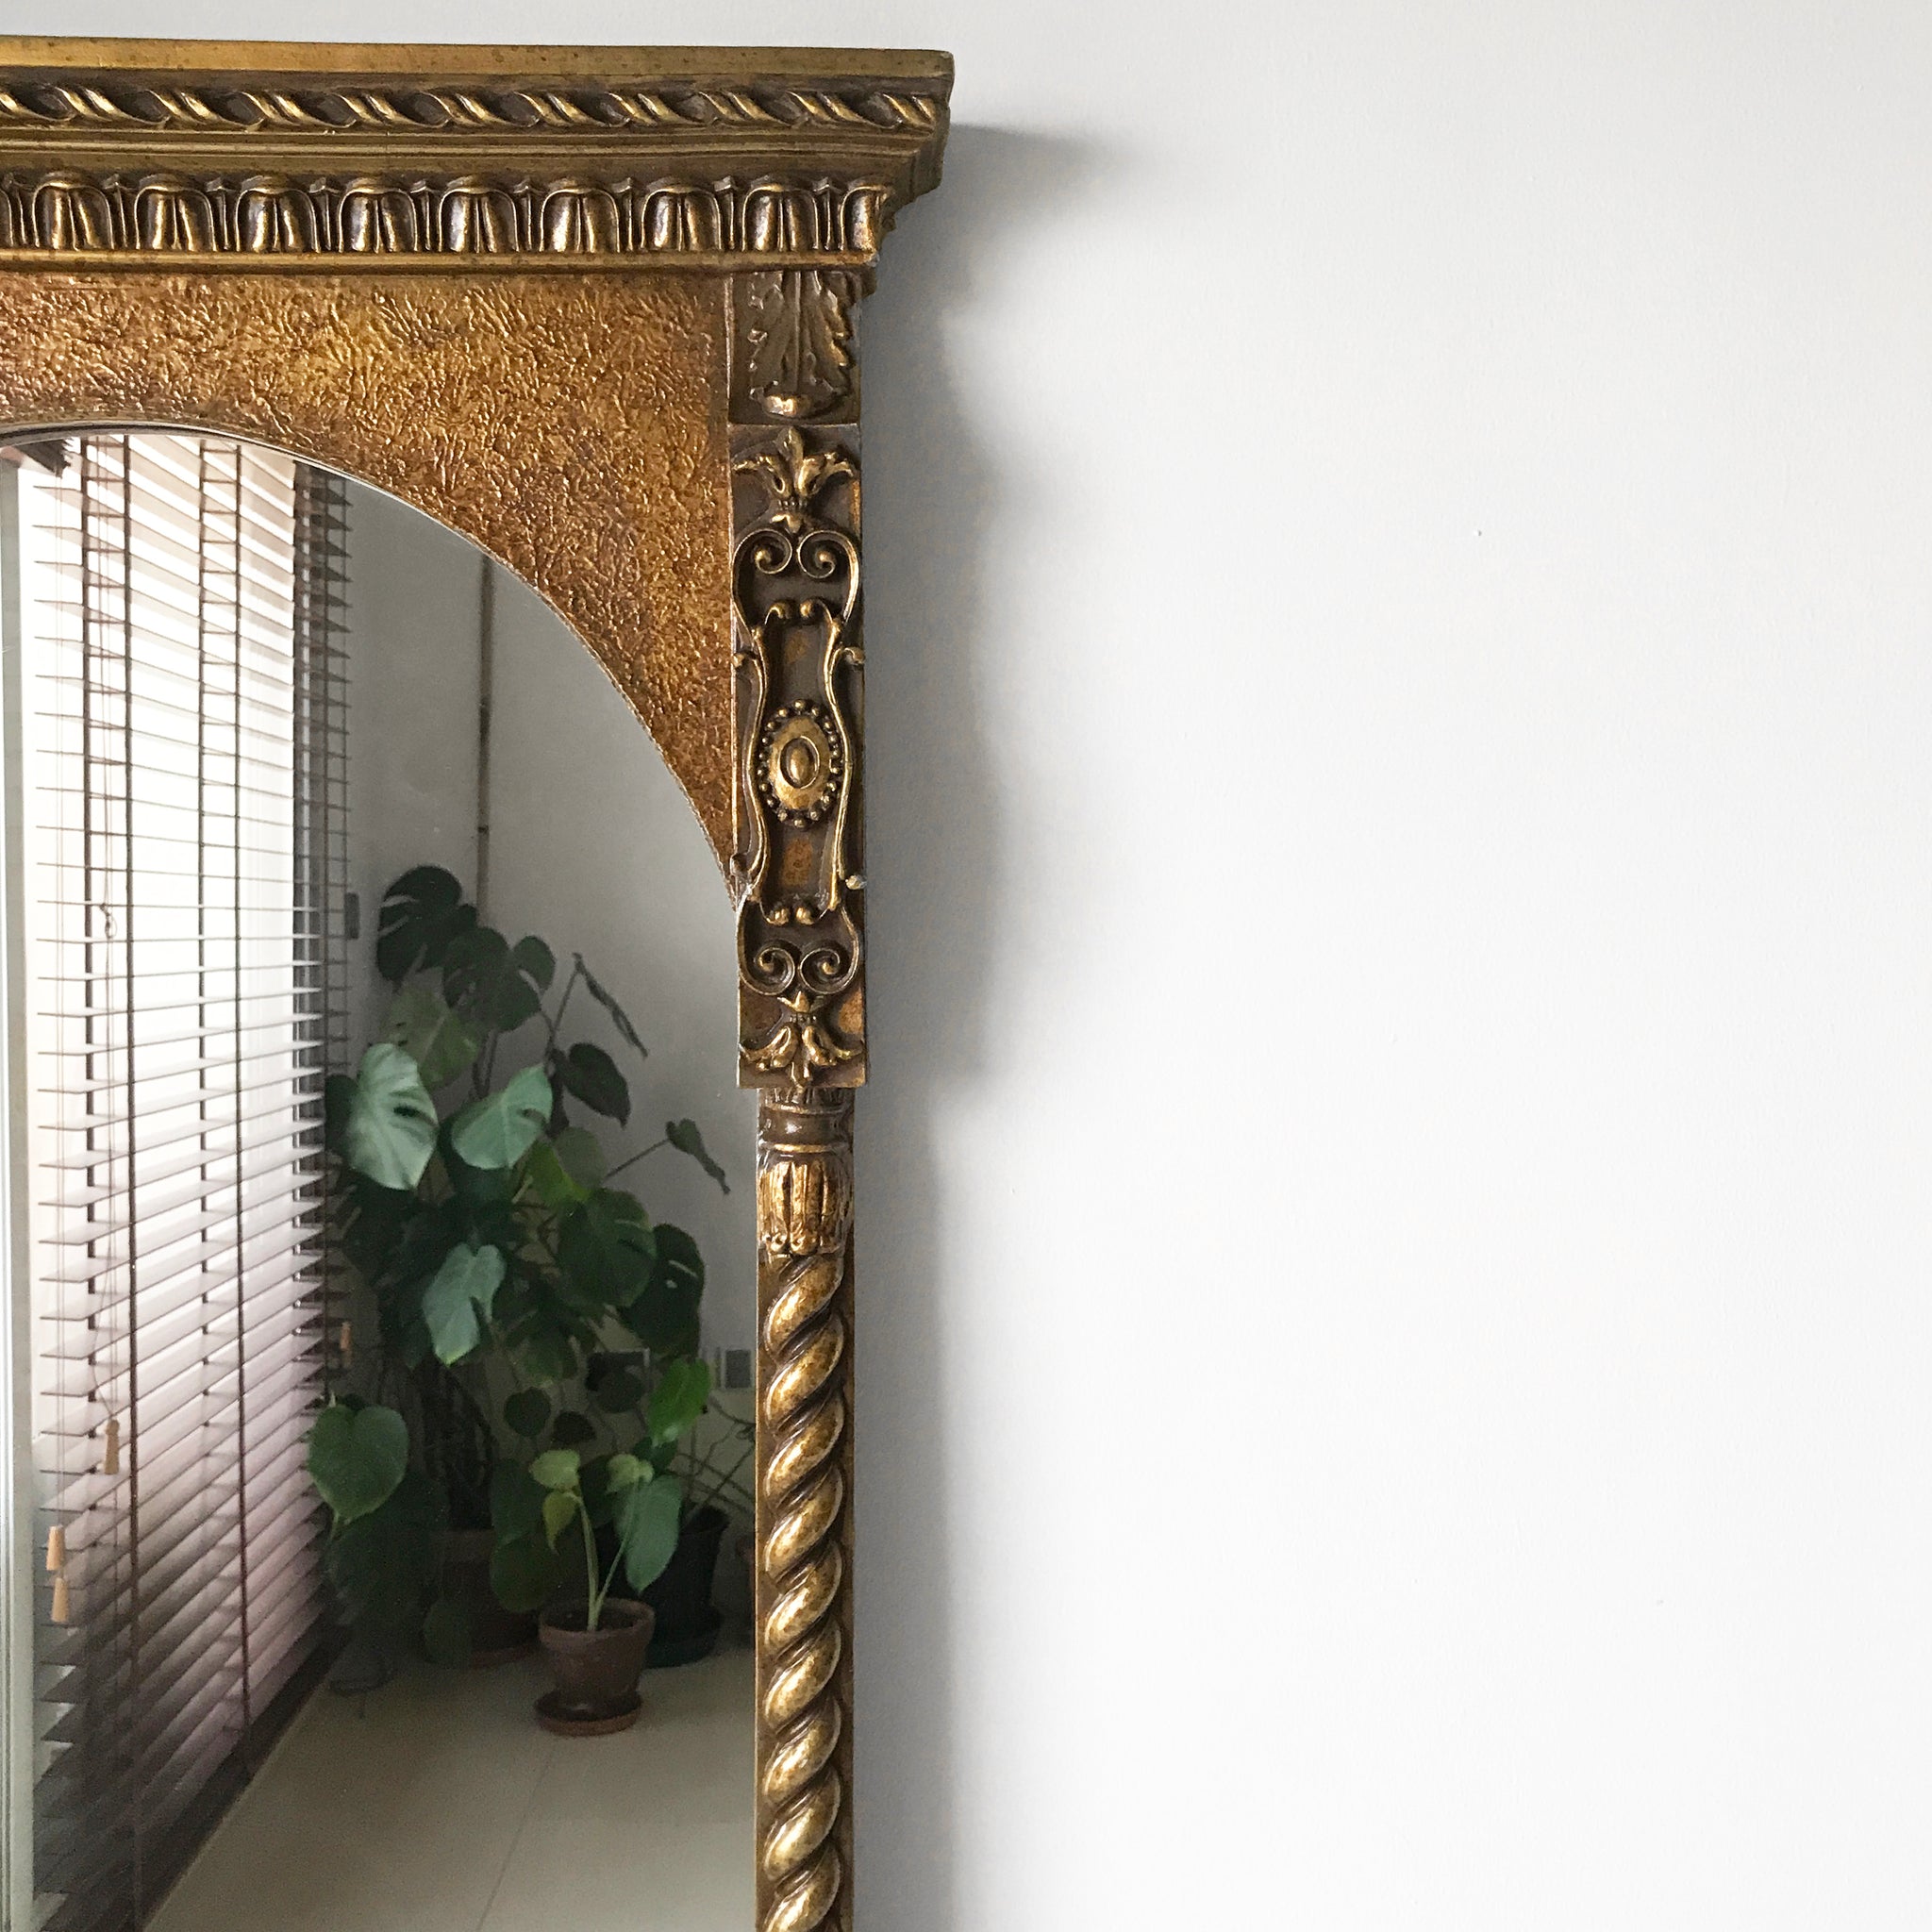 Ornate Frame Arched Wall Mirror